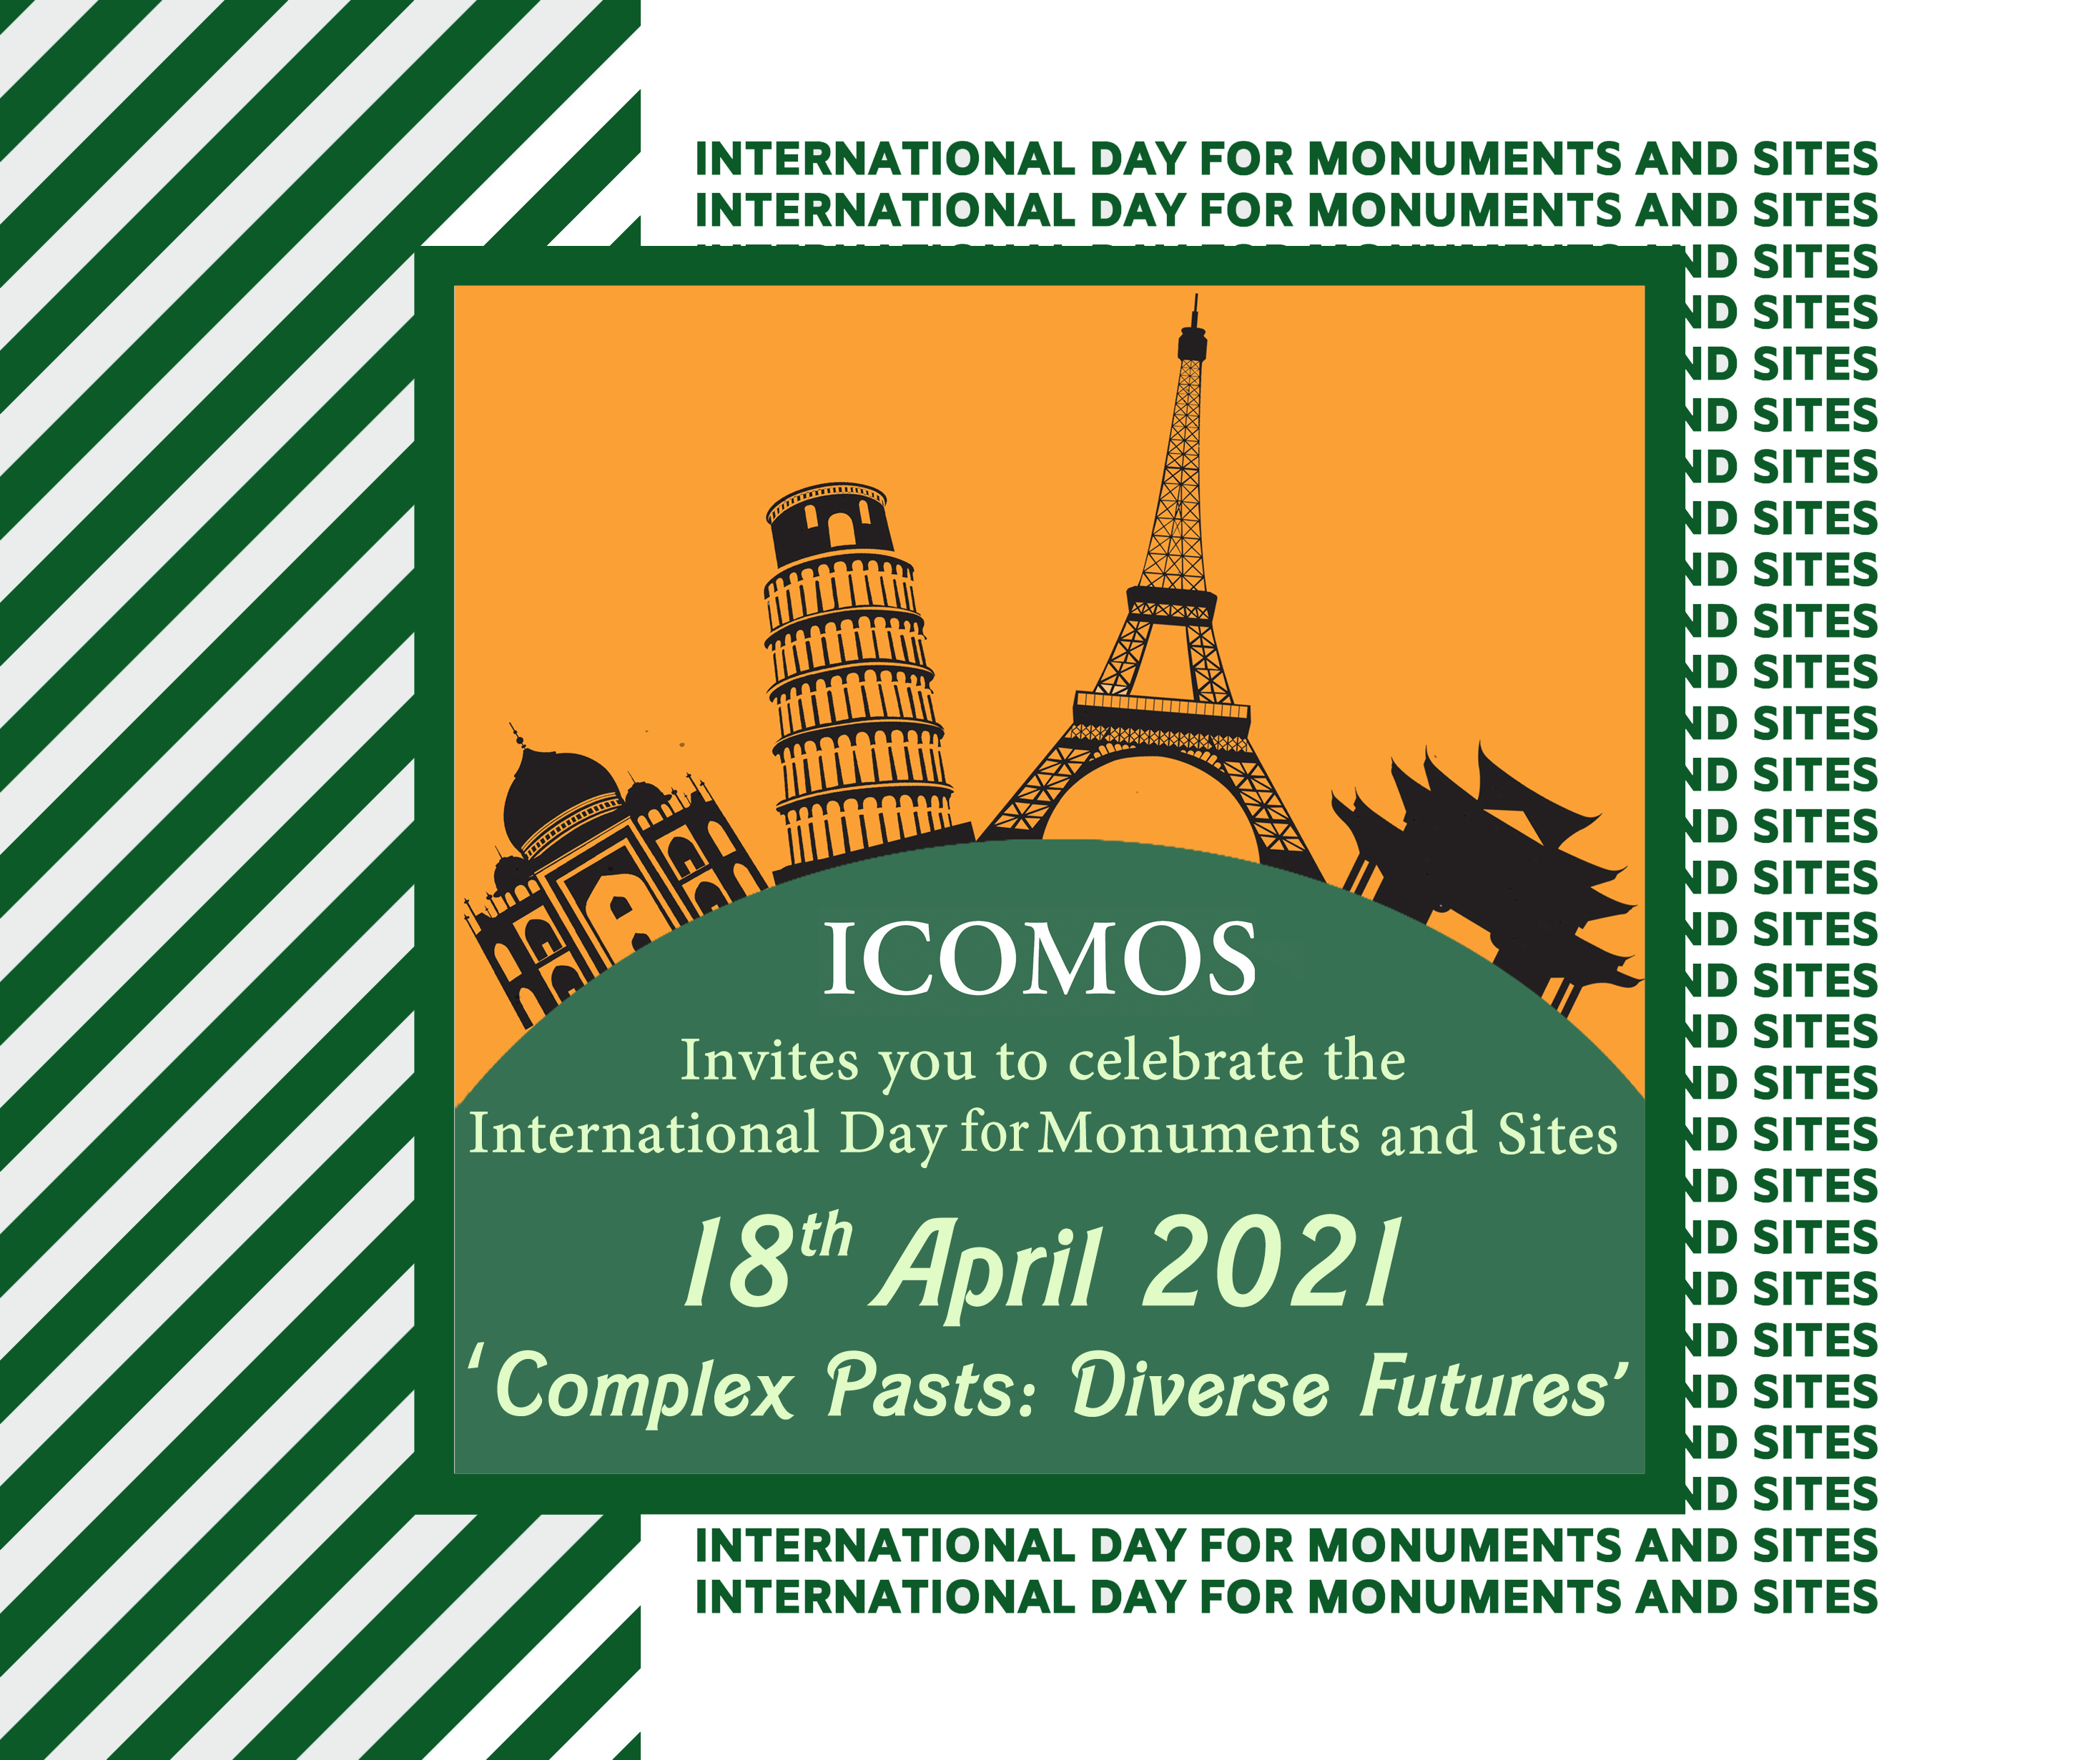 International Day for Monuments and Sites event-- Complex Pasts: Diverse Futures